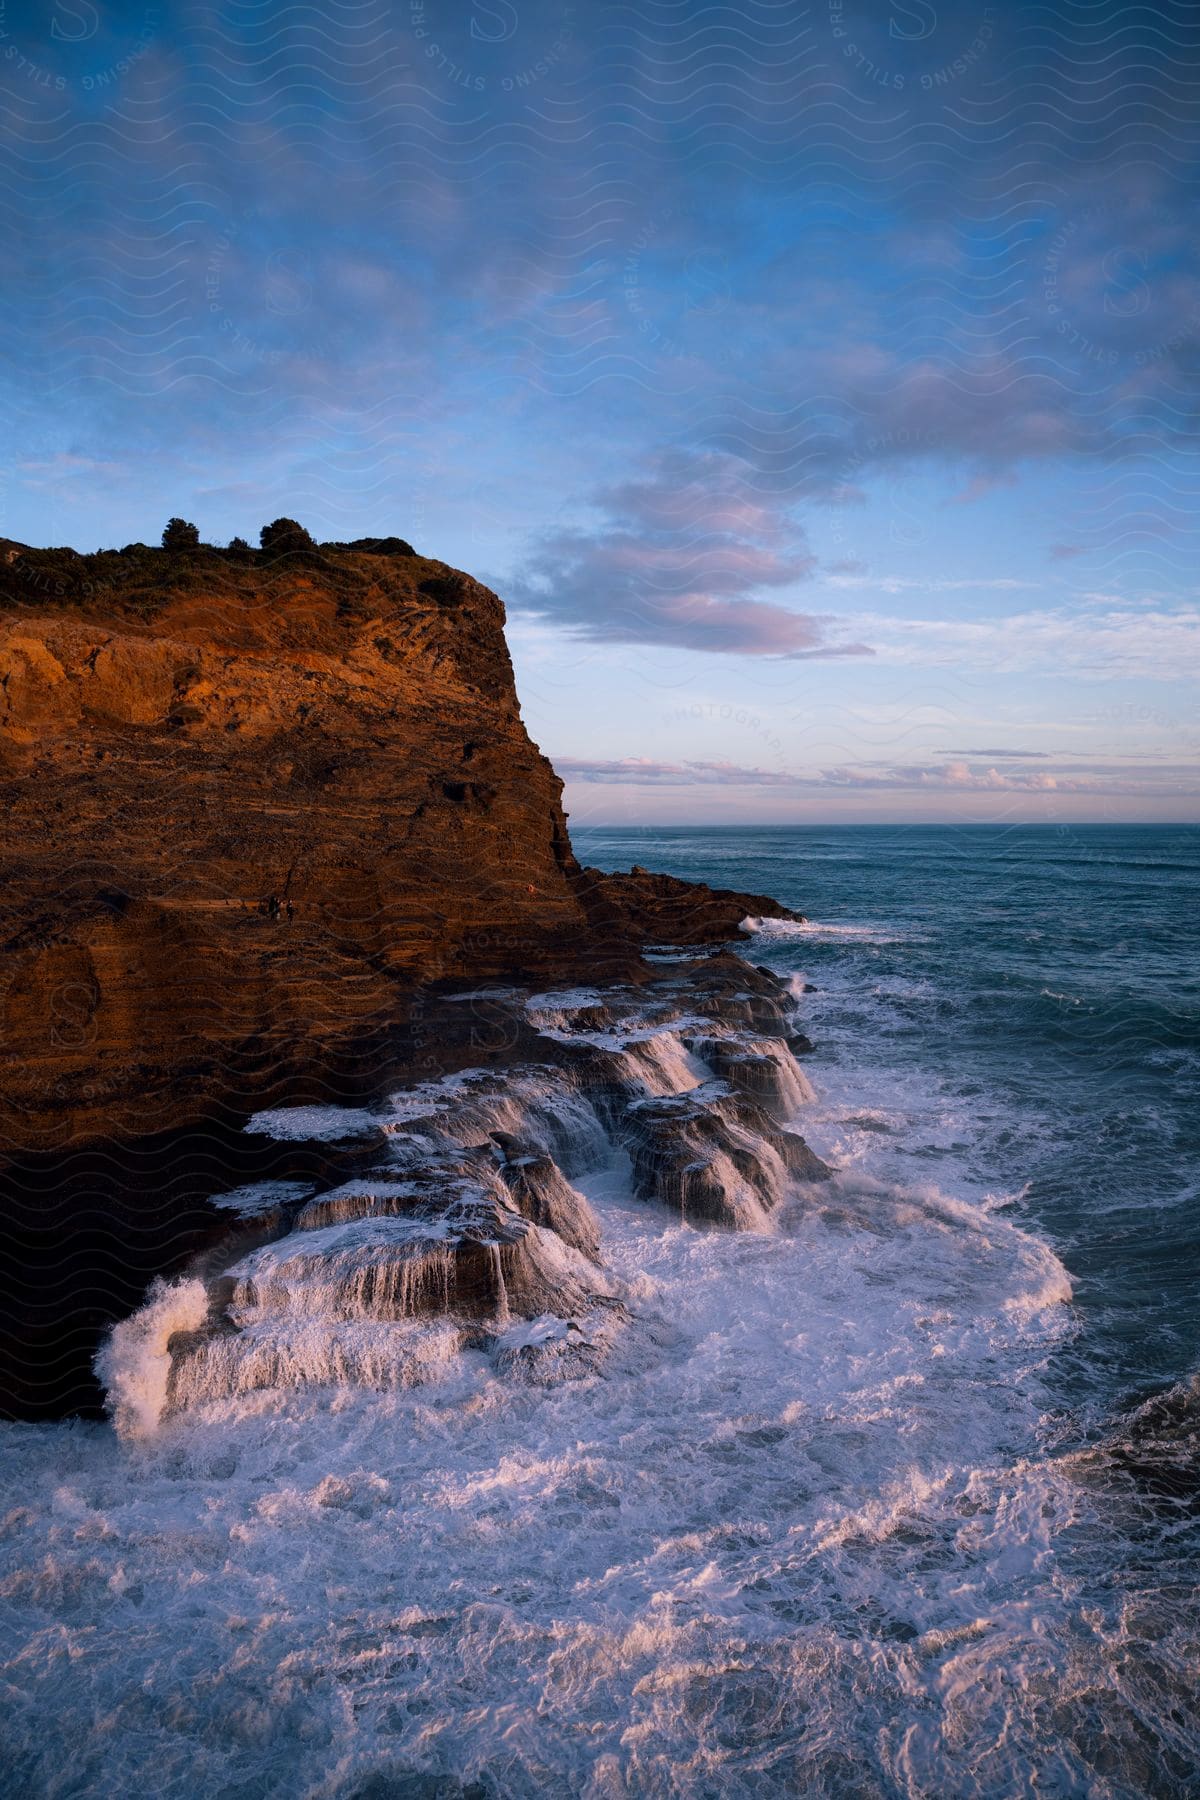 A serene coastline with cliffs and sea waves